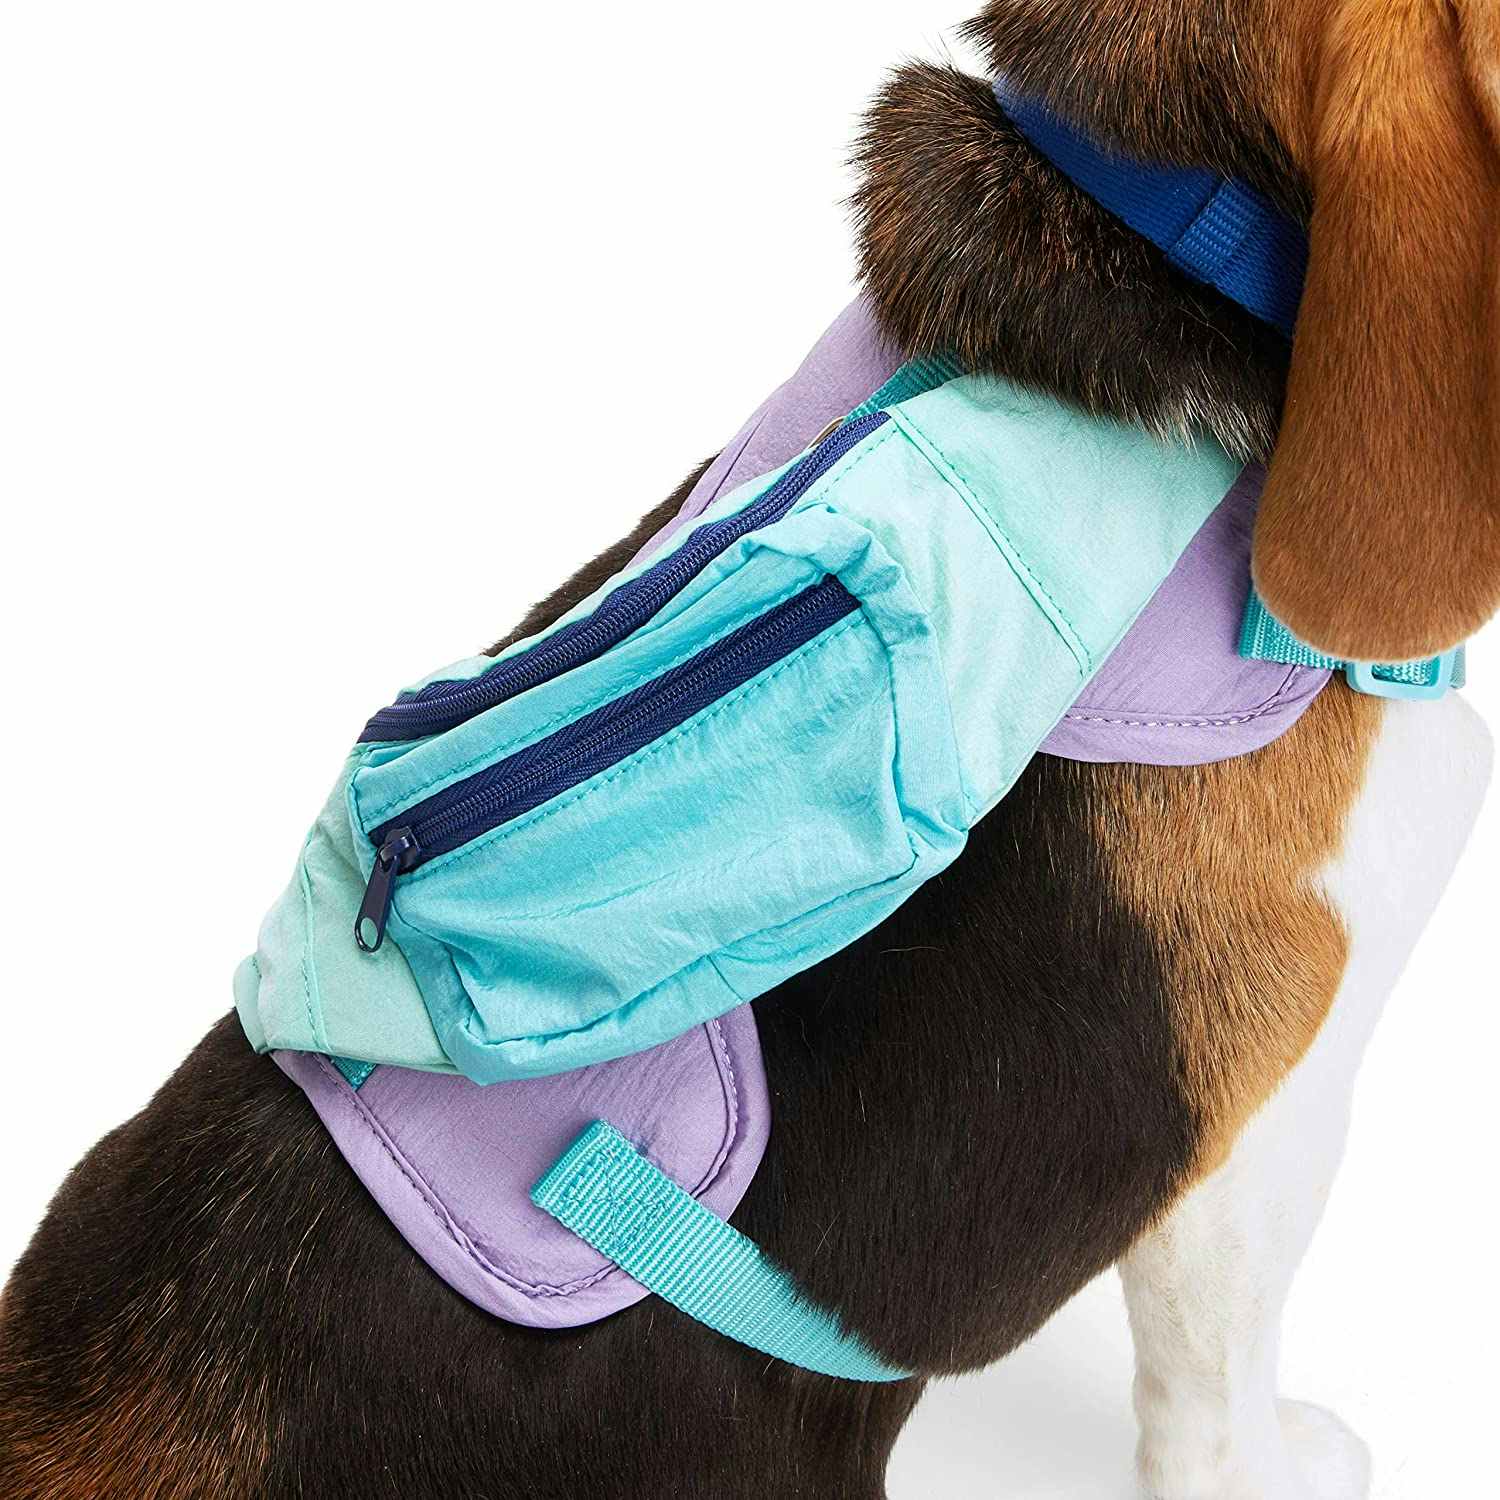 dog wearing a harness with a fanny pack on it